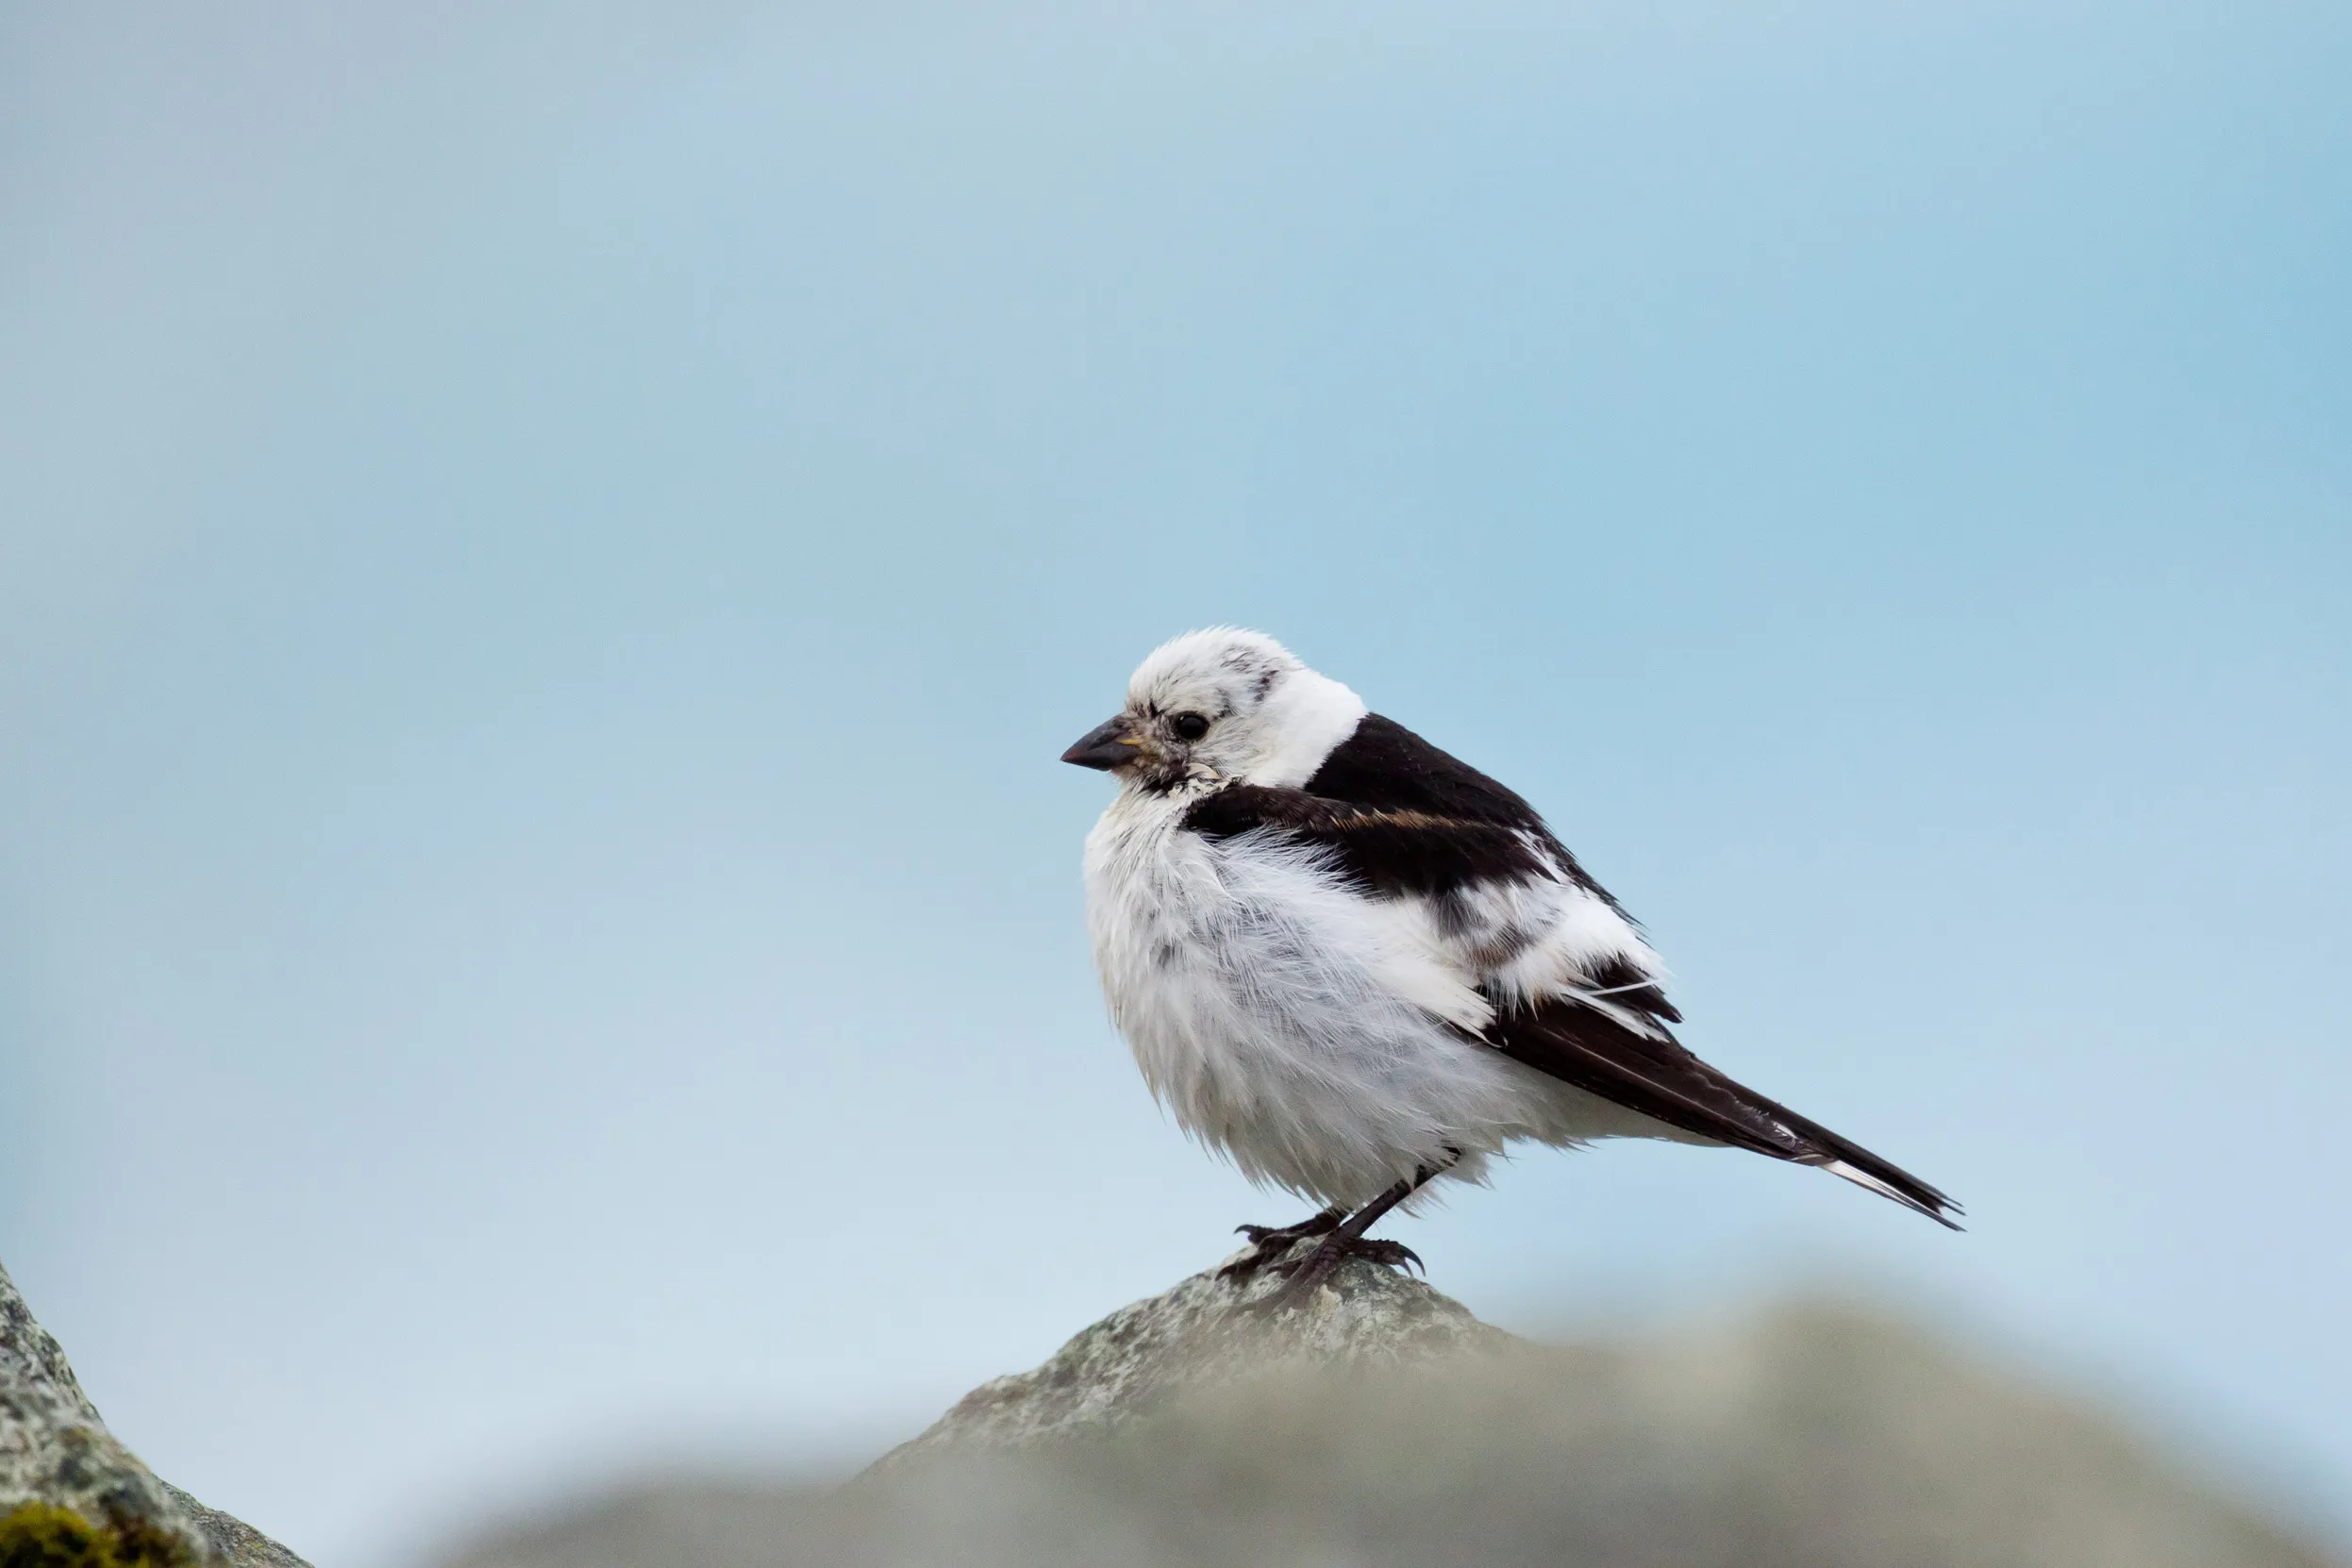 A lone male Snow Bunting sat on a rock.